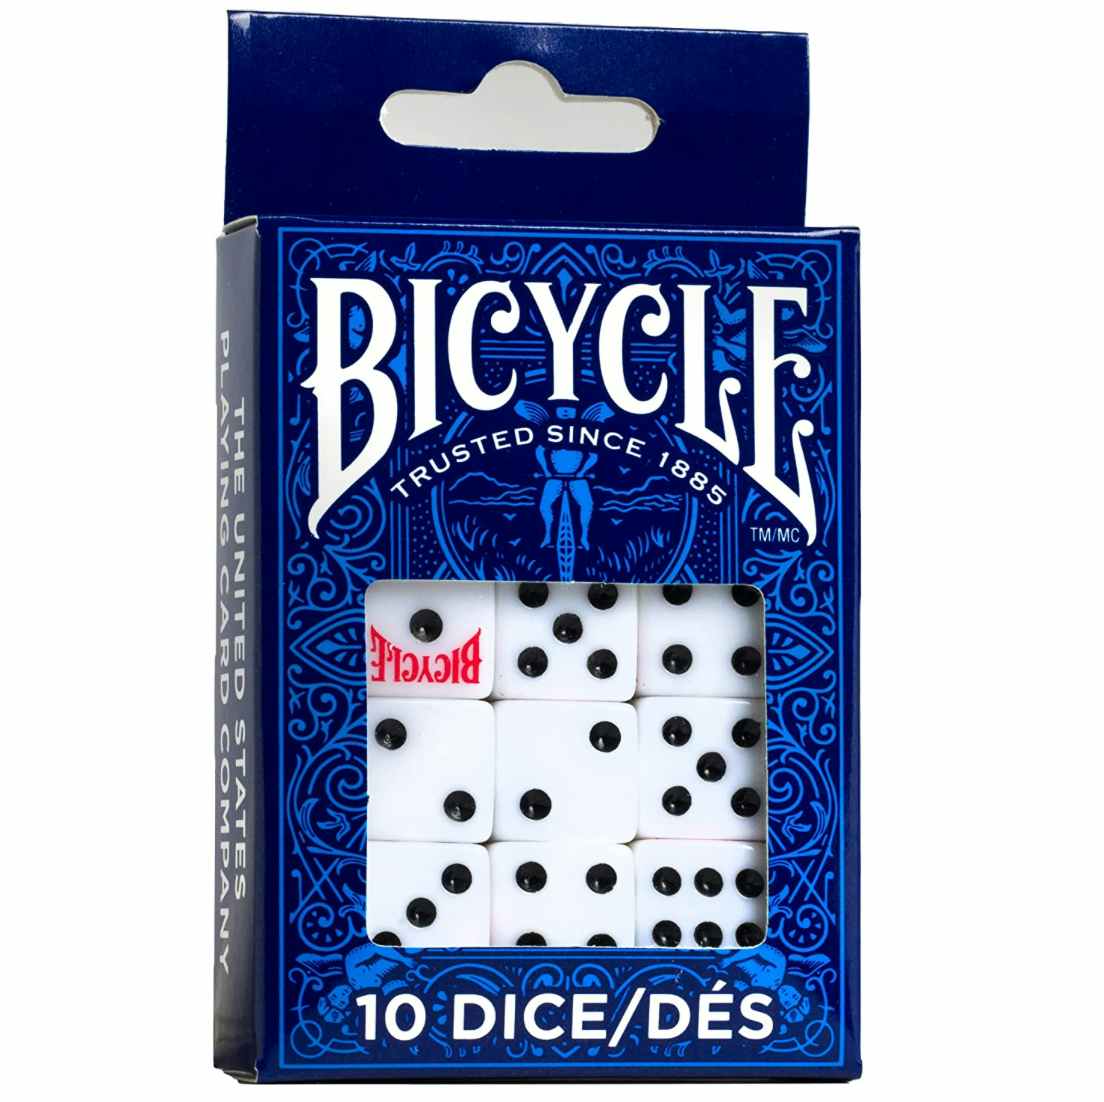 A pack of dice 